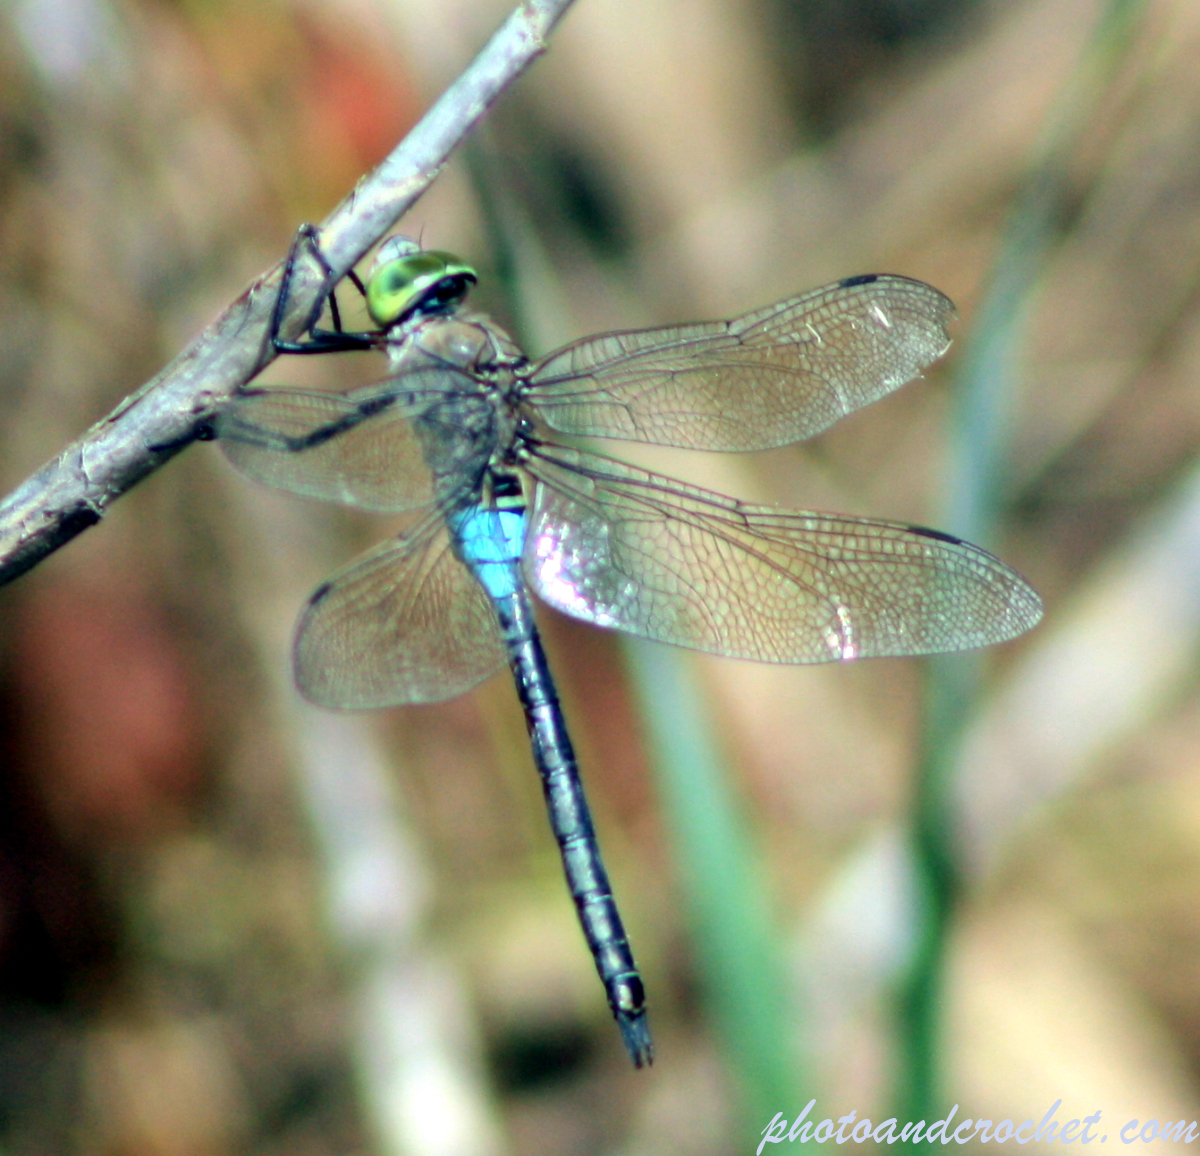 Dragonfly - Image